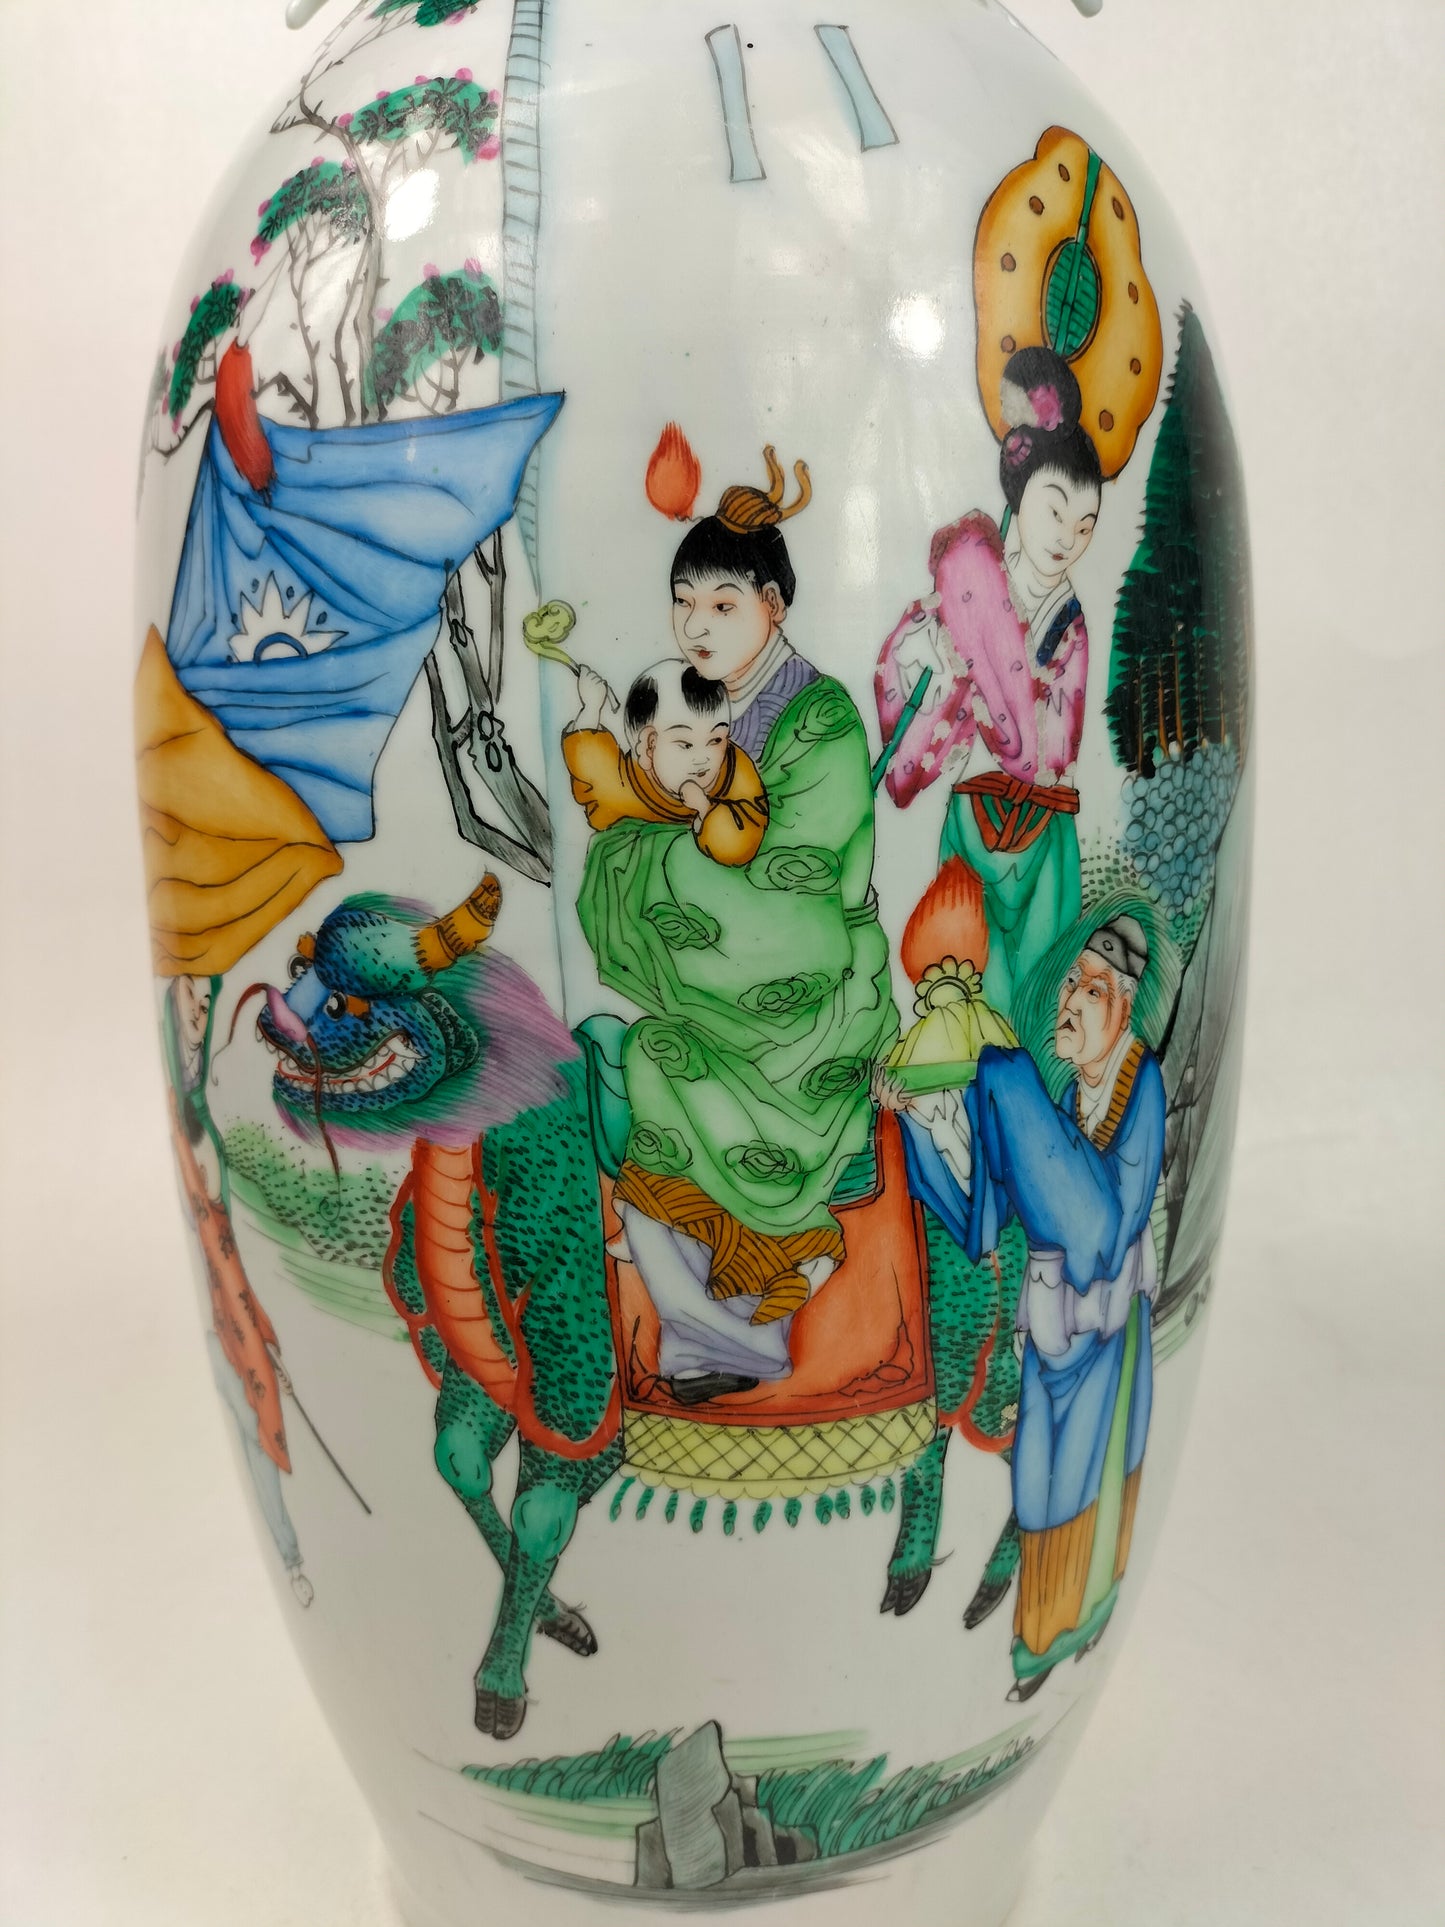 Large antique Chinese vase decorated with figures and a Kylin // Republic period (1912-1949)